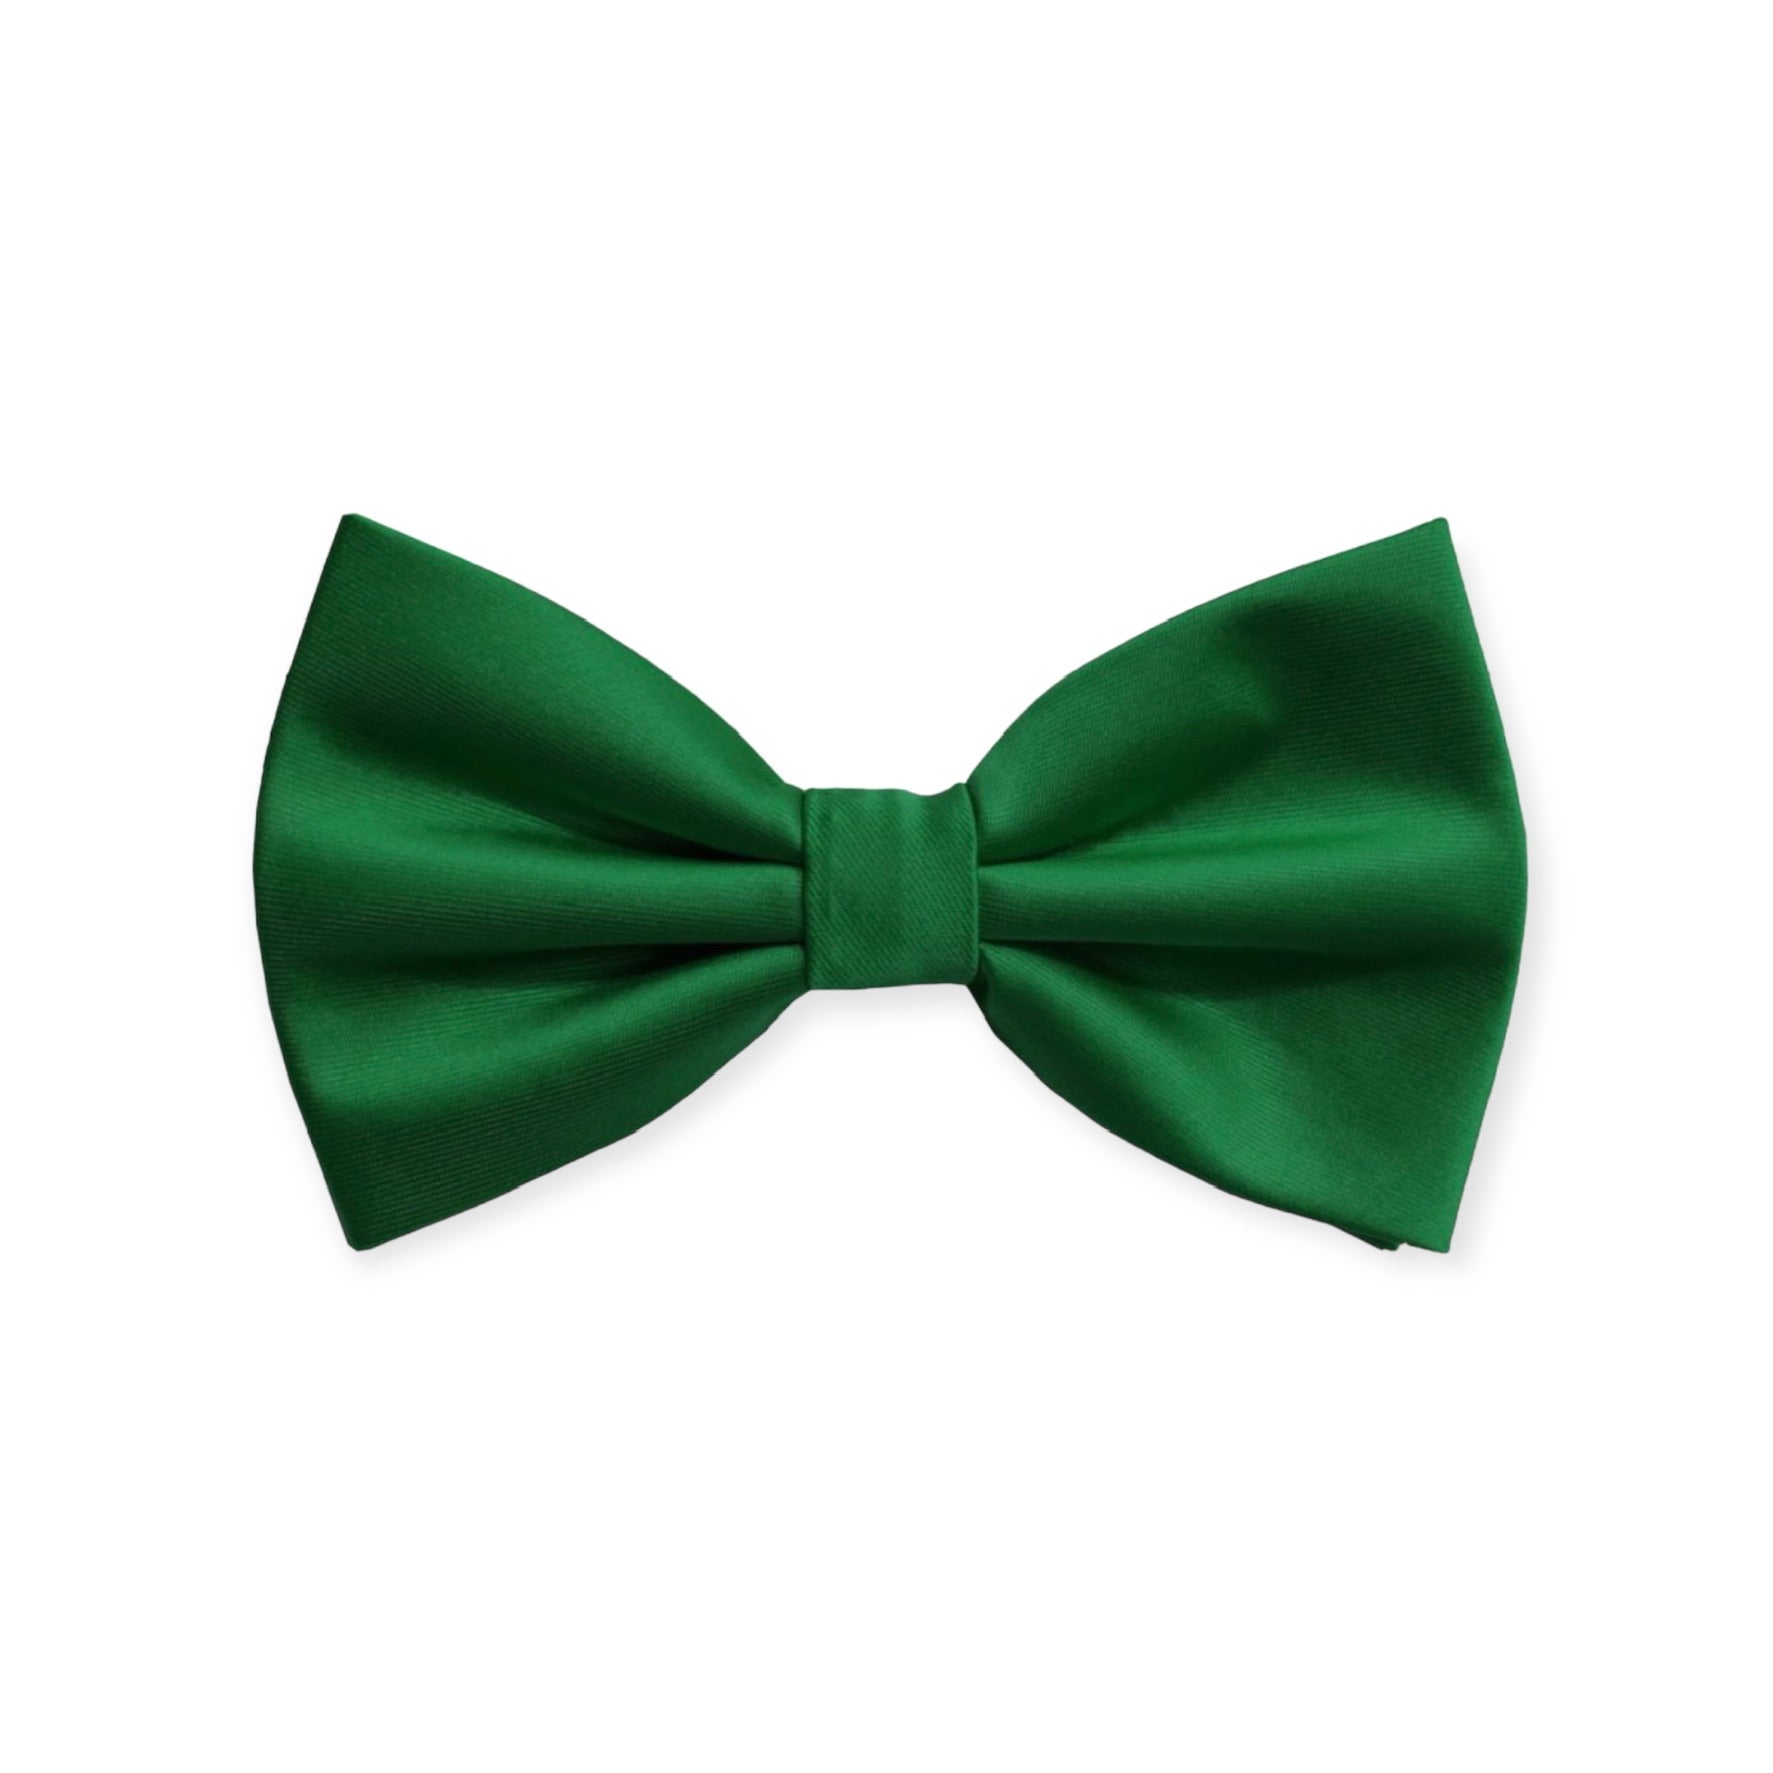 Solid Emerald Green Bow Tie and Hanky